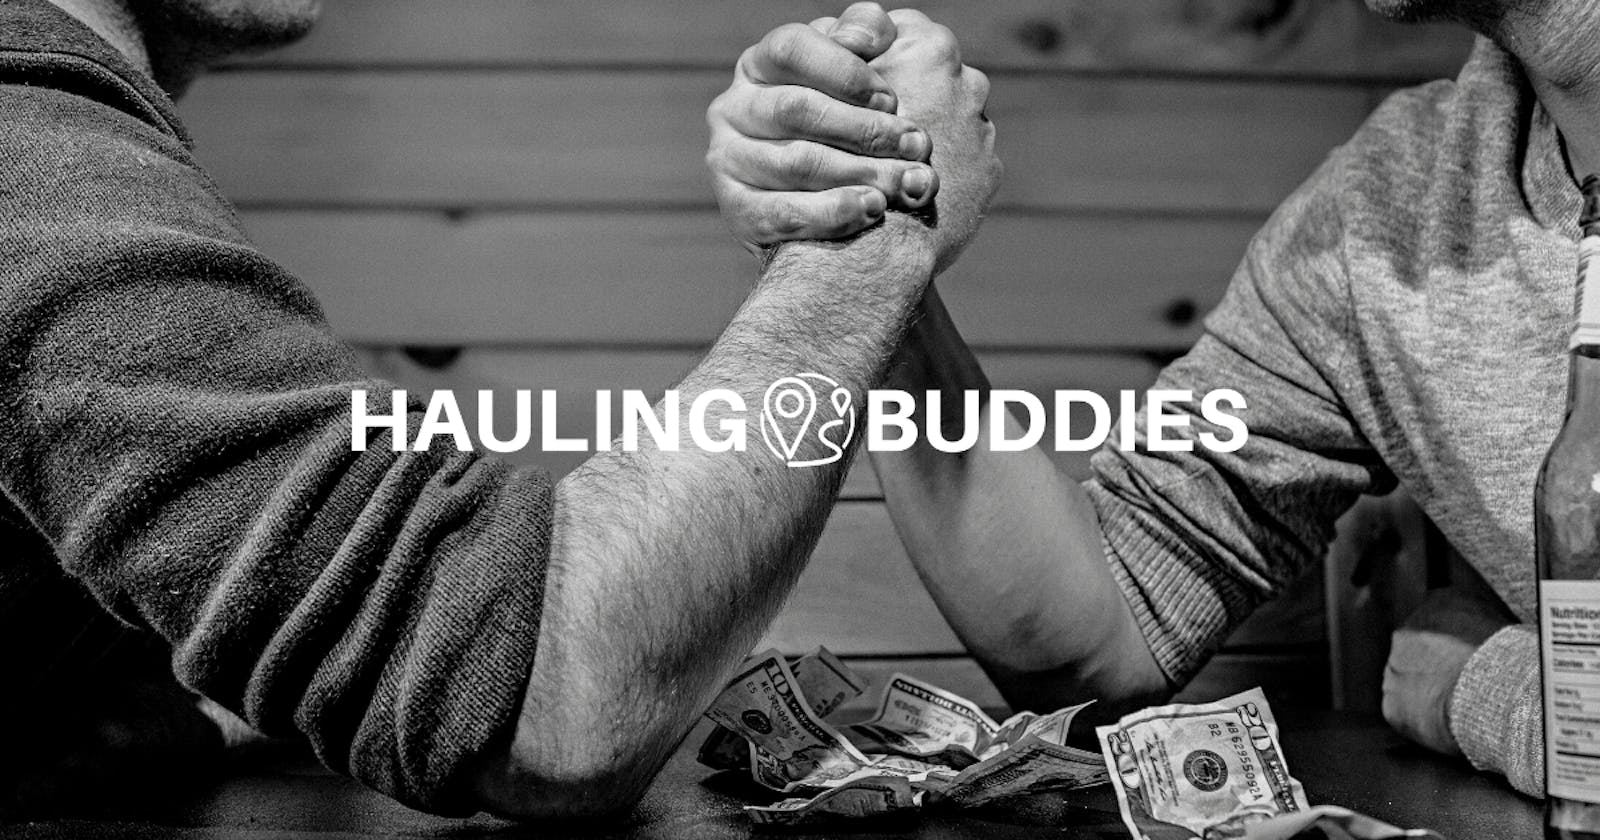 Why a Quote Bidding System is a Risky Choice for Animal Transportation: The Benefits of Choosing Hauling Buddies